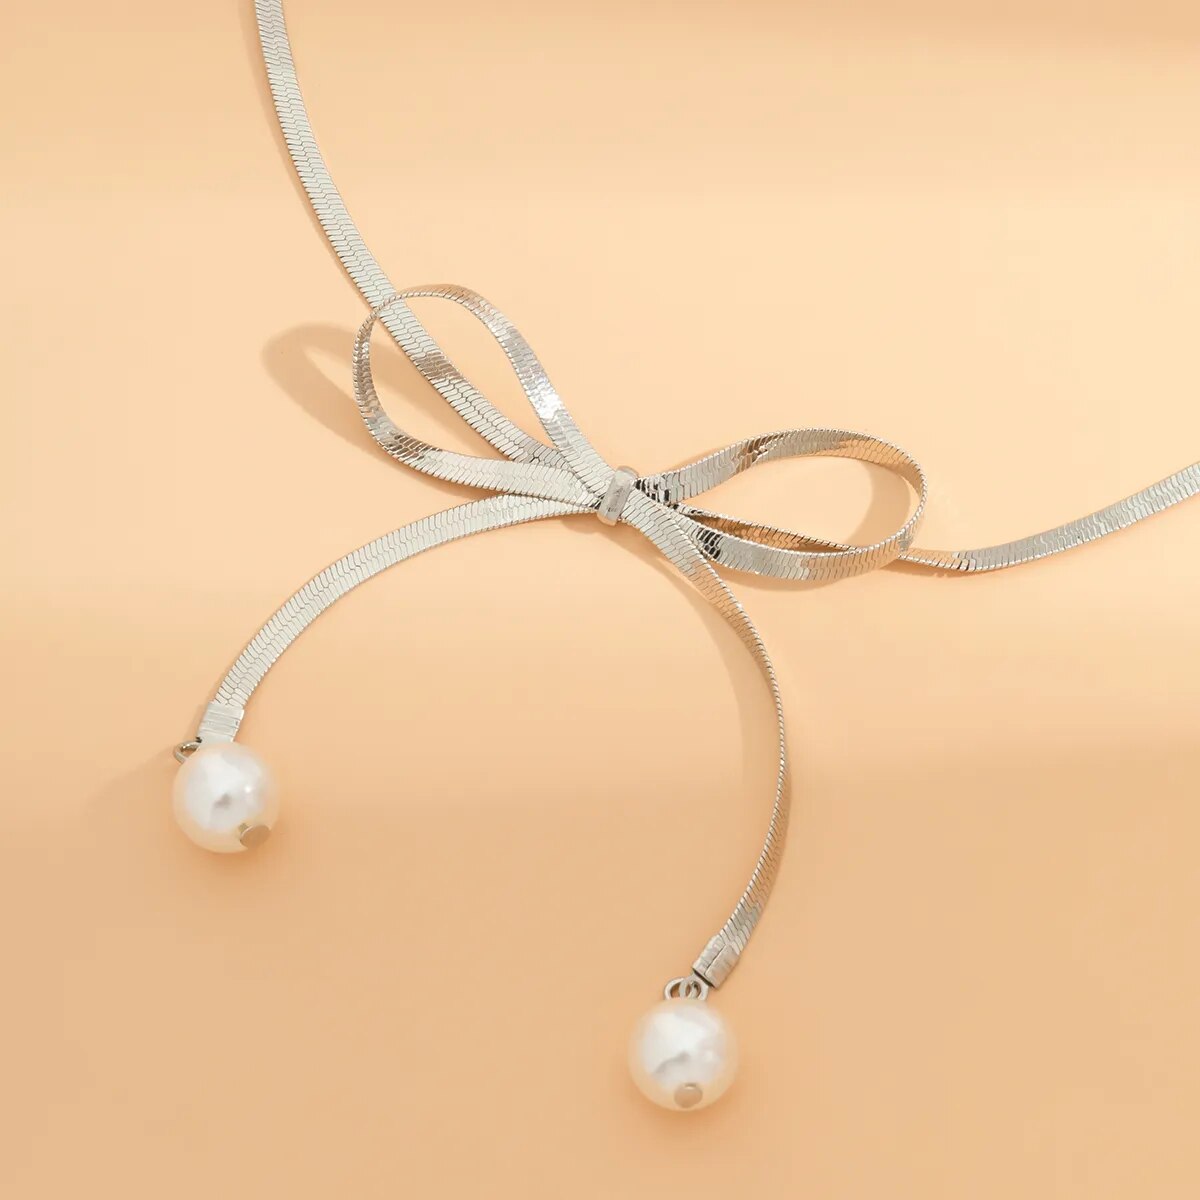 Adora London The Bow Necklace Stainless steel pearl bow detailed necklace